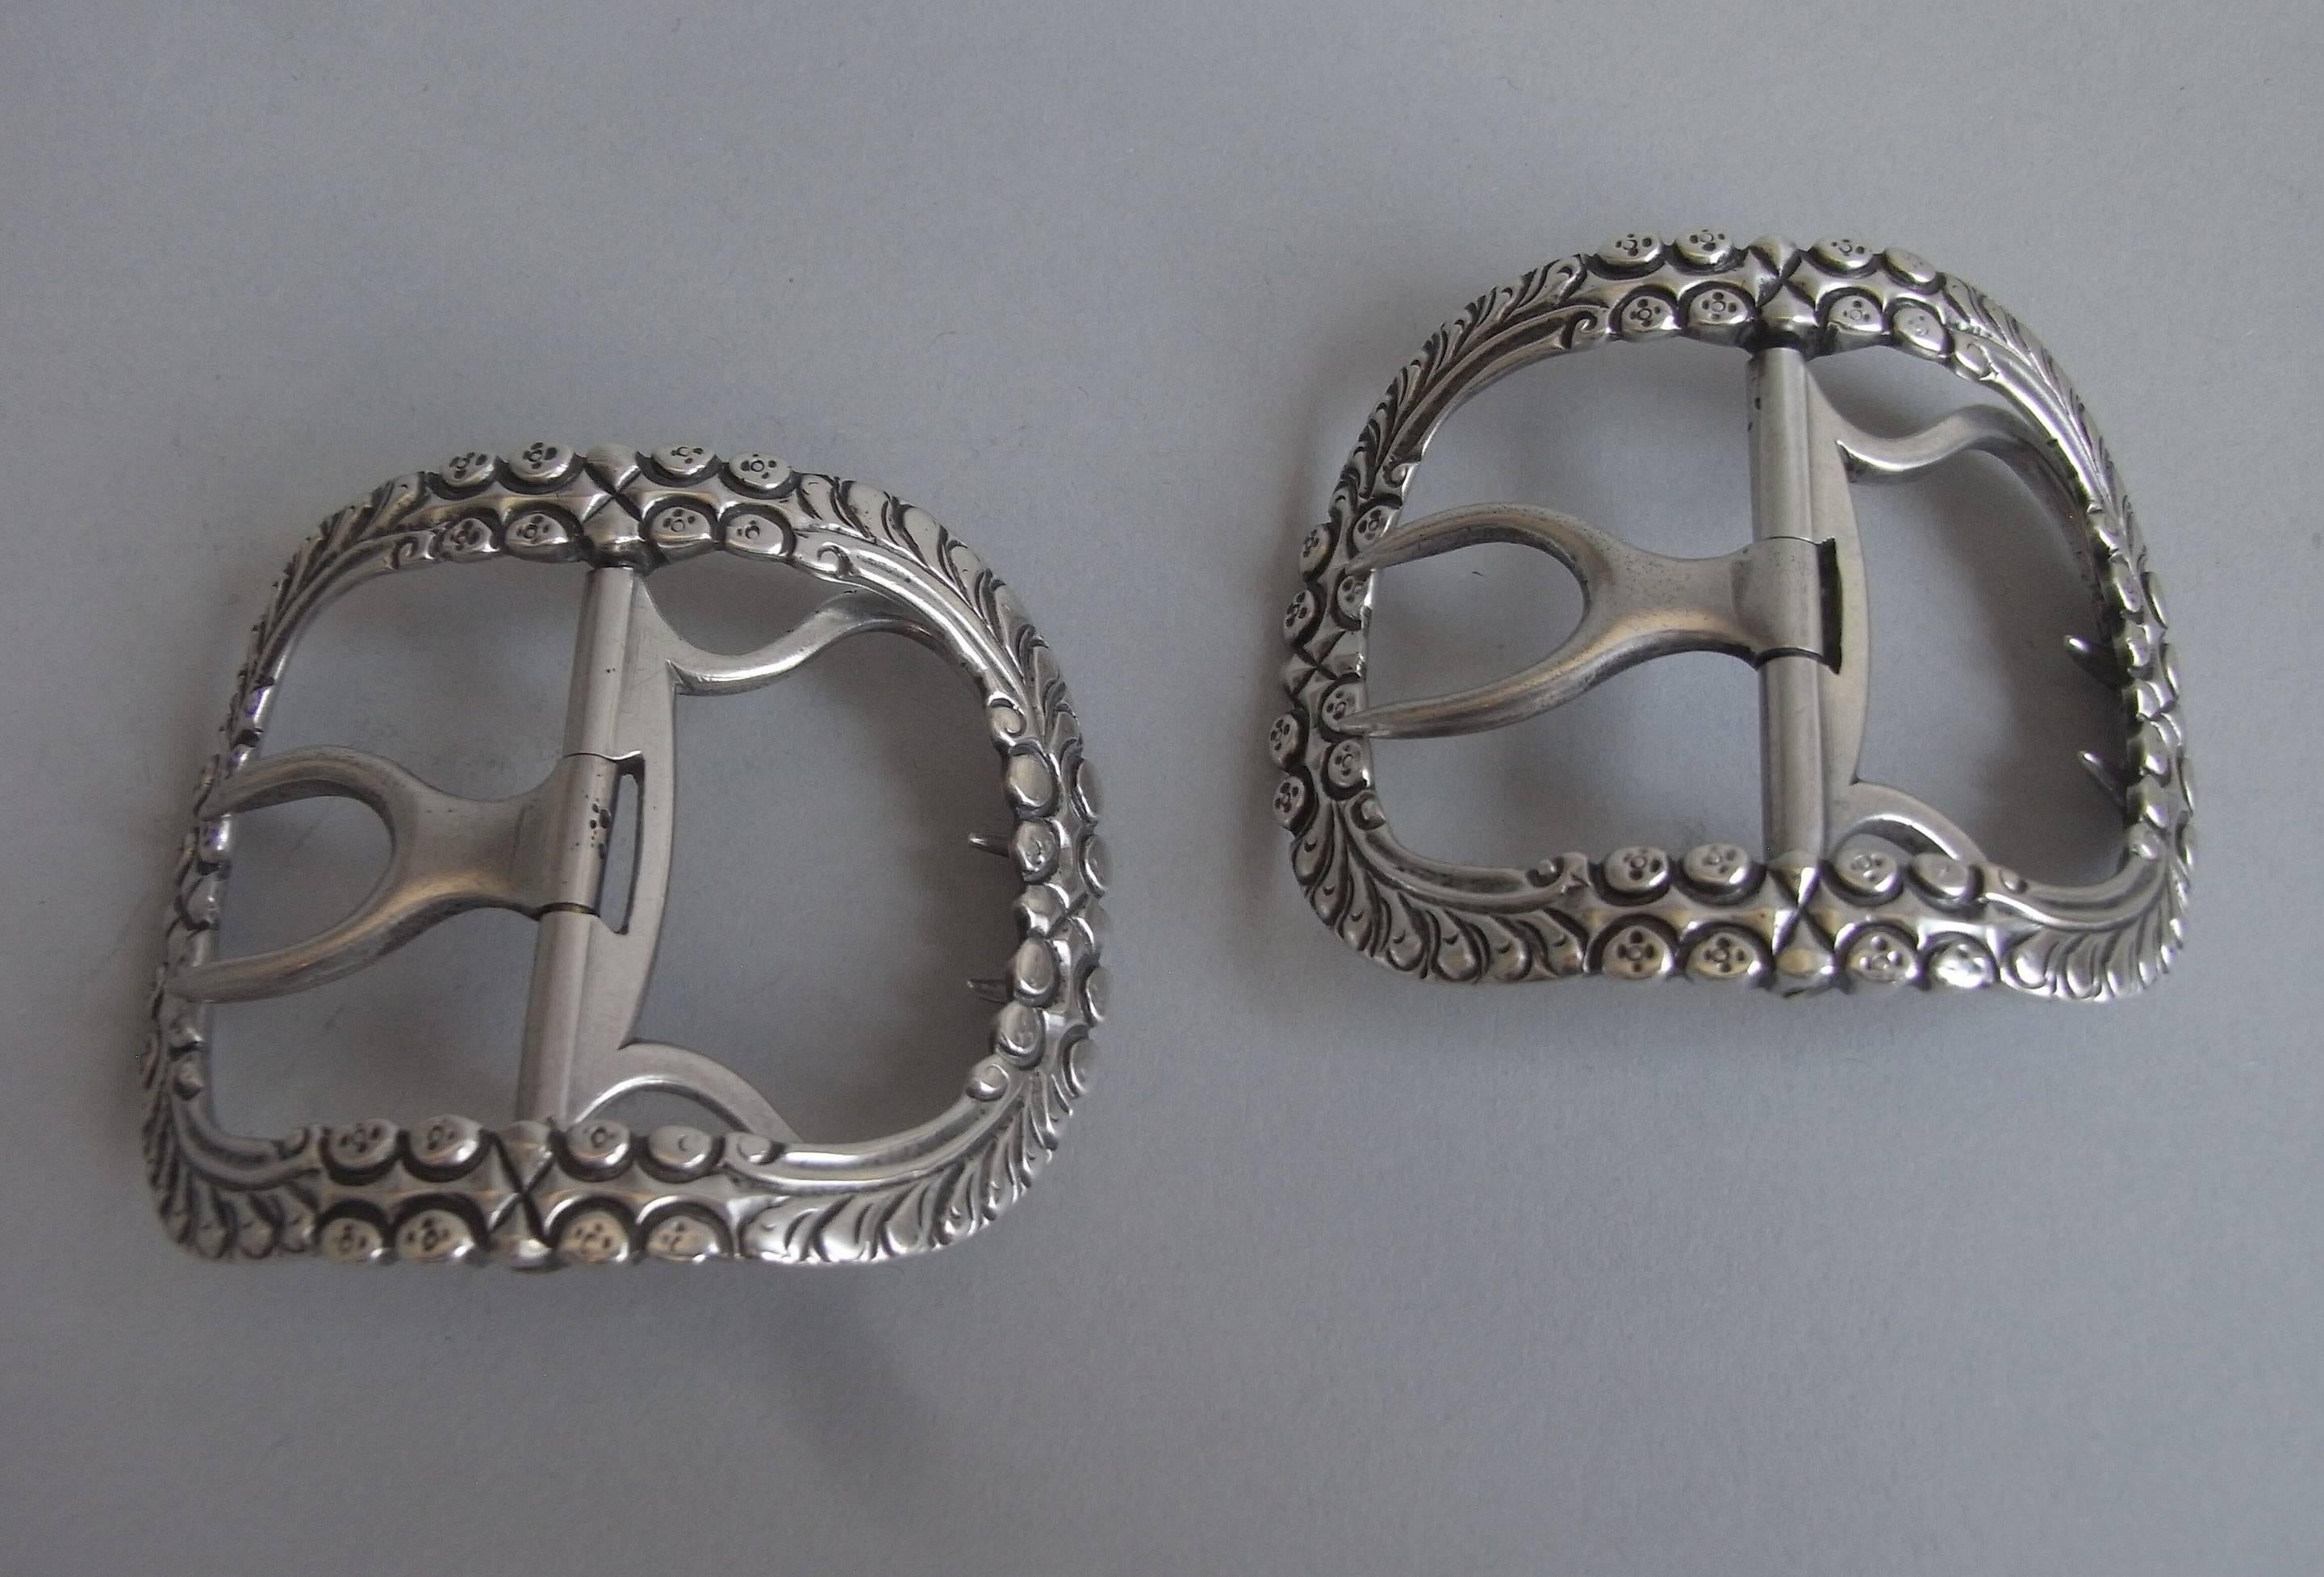 The Buckles are of arched form and the openwork frames are unusually chased with roundels and feathery scrolls. The frames are backed by solid silver chapes, which is a most unusual feature as most are made of steel at this date. The quality of